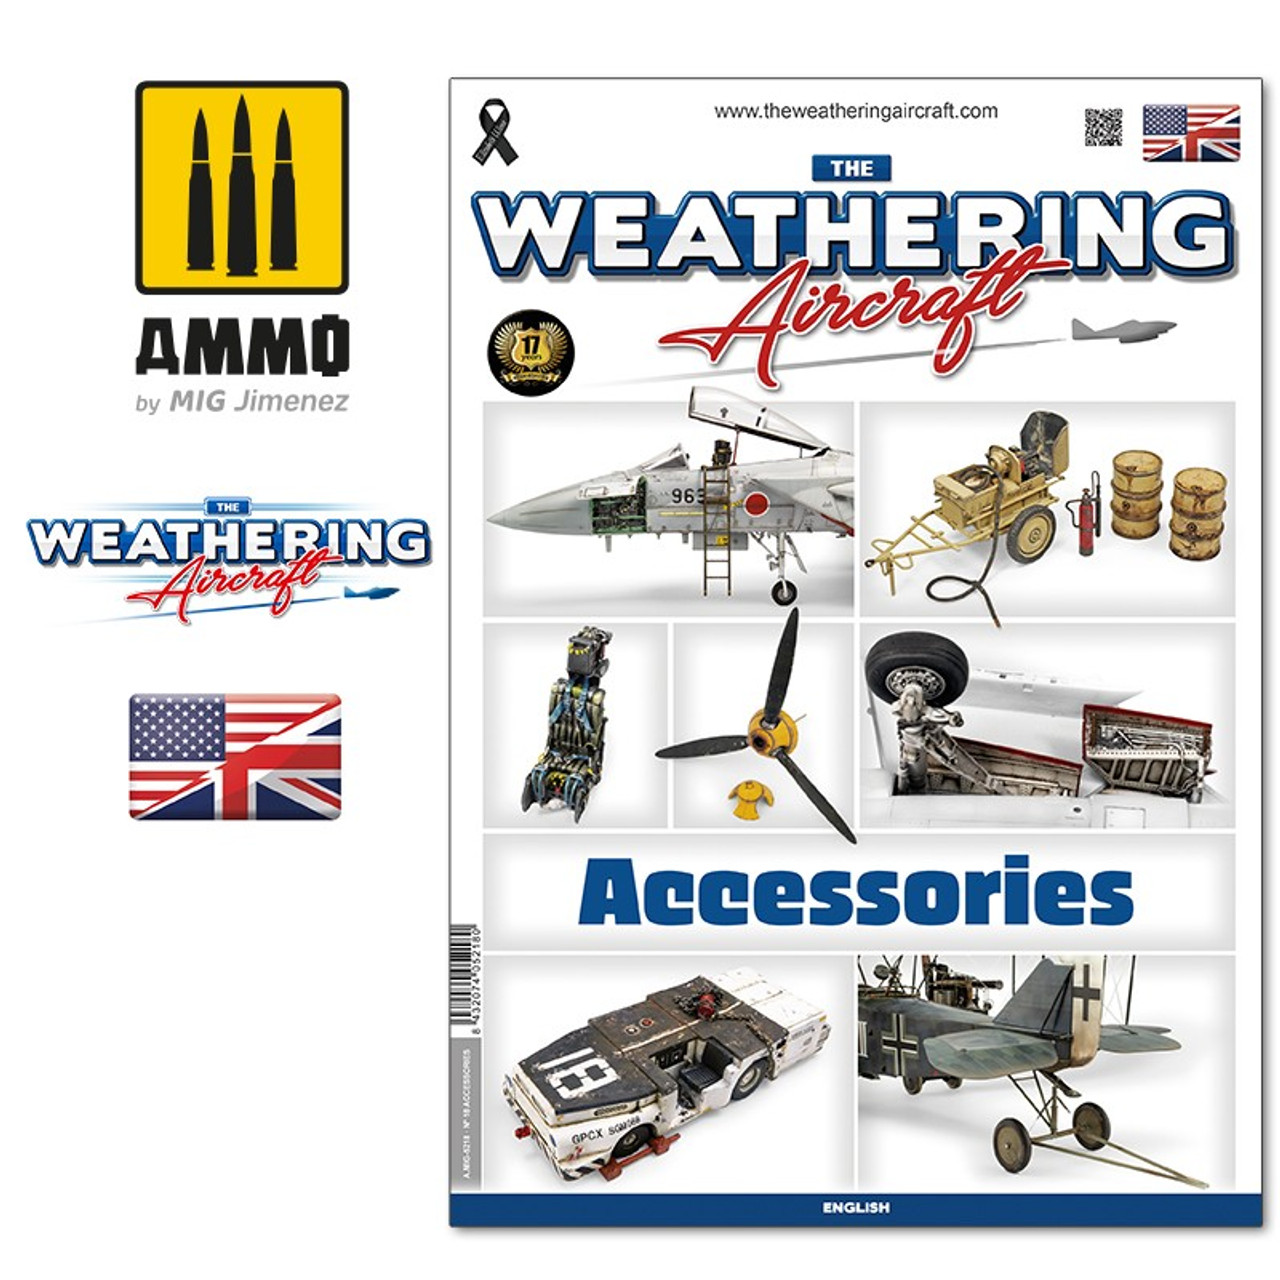 Weathering Aircraft 018: Accessories